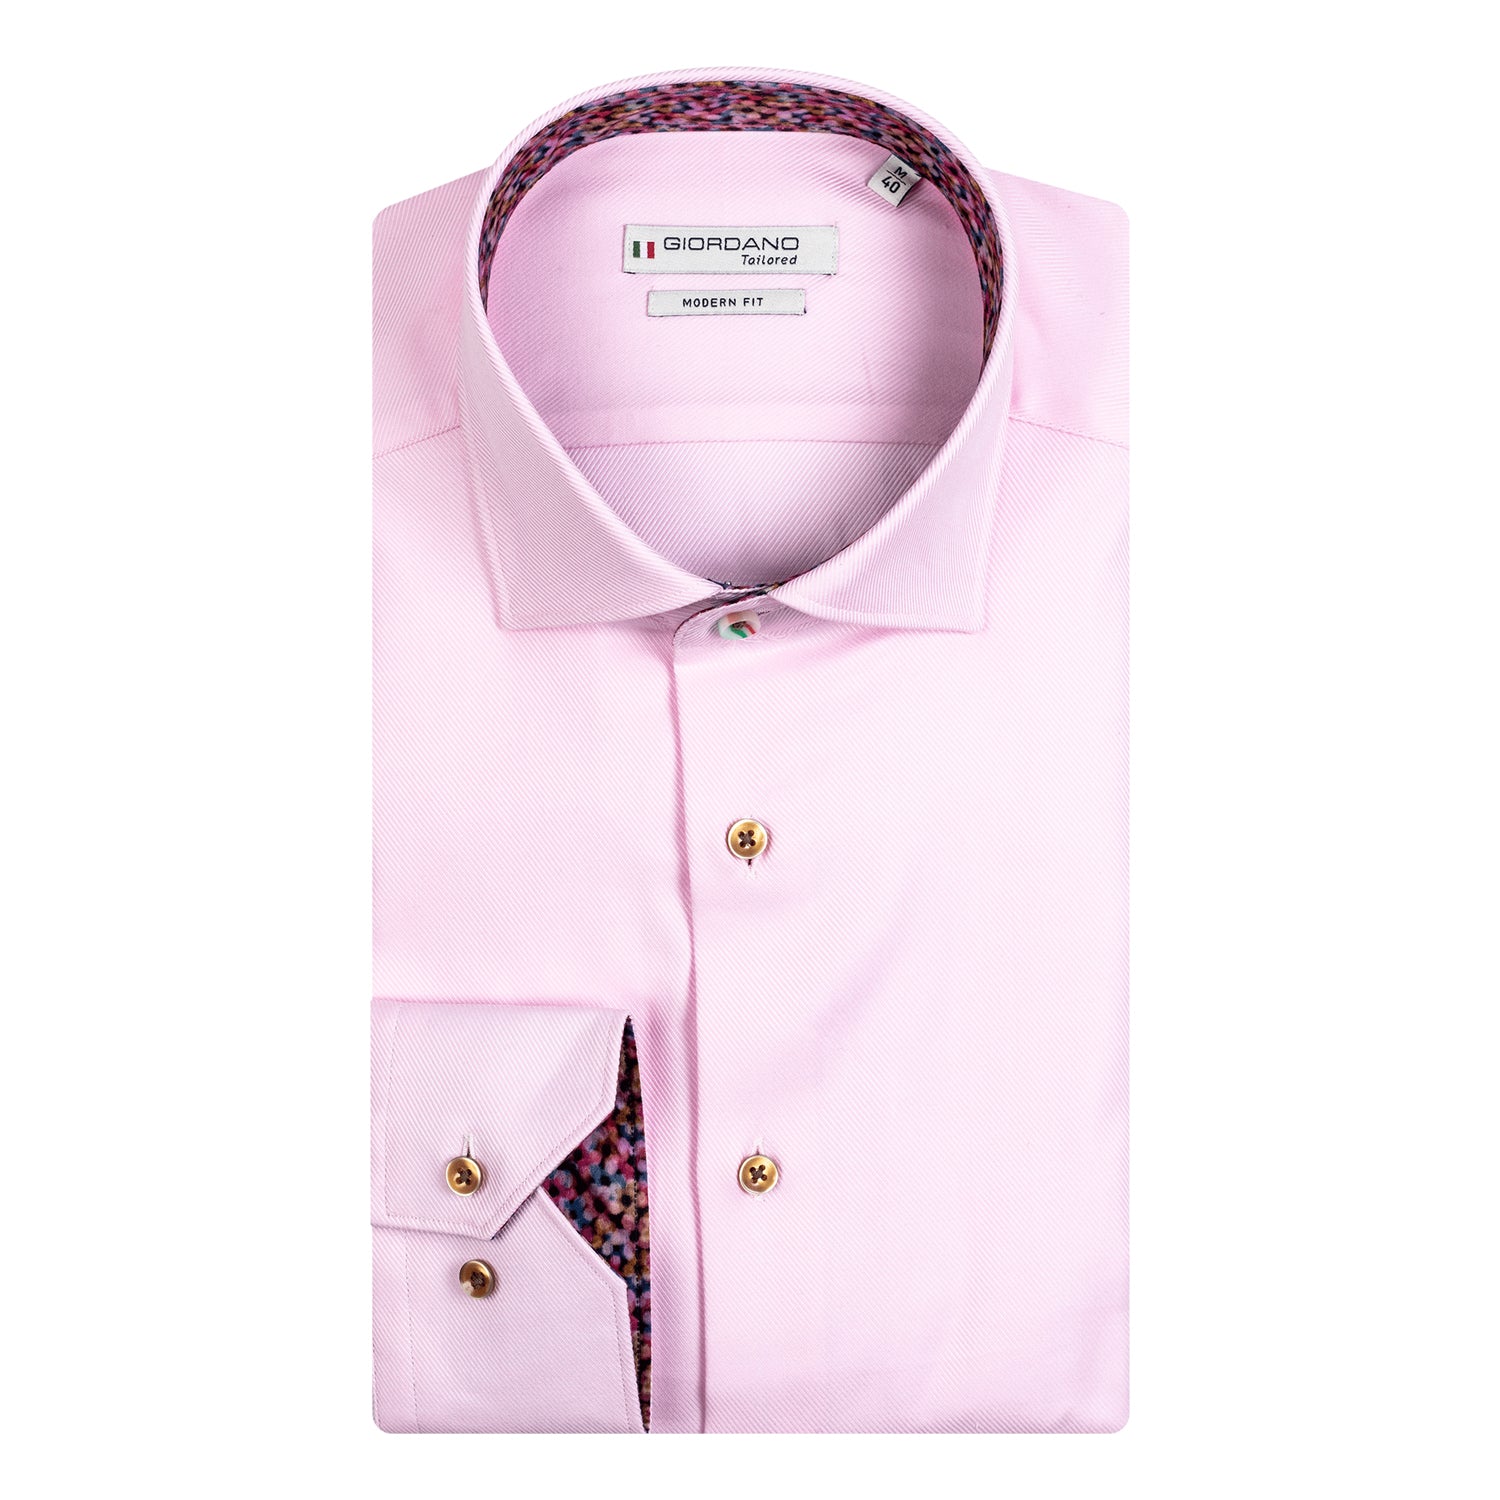 Giordano Men's Pink Shirt Long Sleeve with Floral Trim